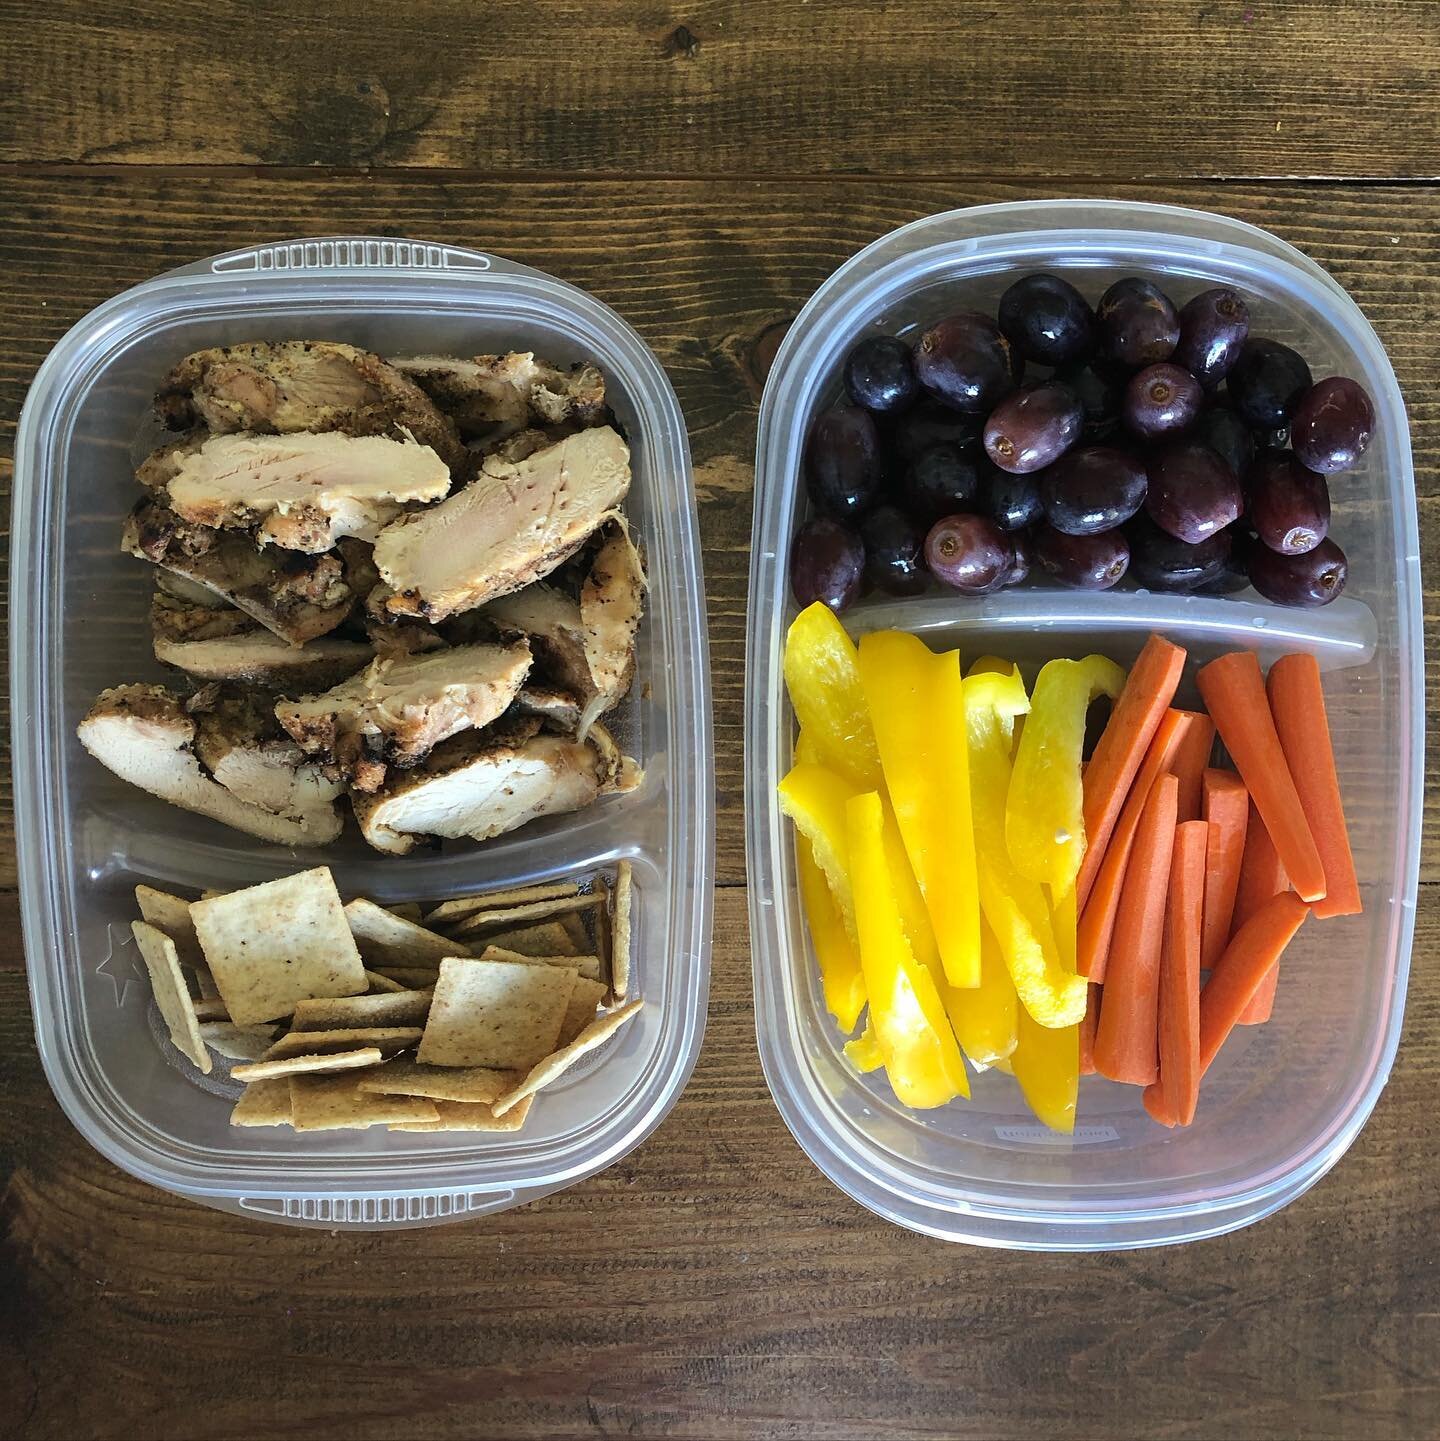 The kids wanted a picnic lunch on the bridge on our walking trail today, so I said YES!
- cold, sliced chicken thighs
- @simplemills crackers
- carrots and peppers slices 
- grapes
.
We probably walked/bikes/scootered 1.5-2 miles, played on the play 